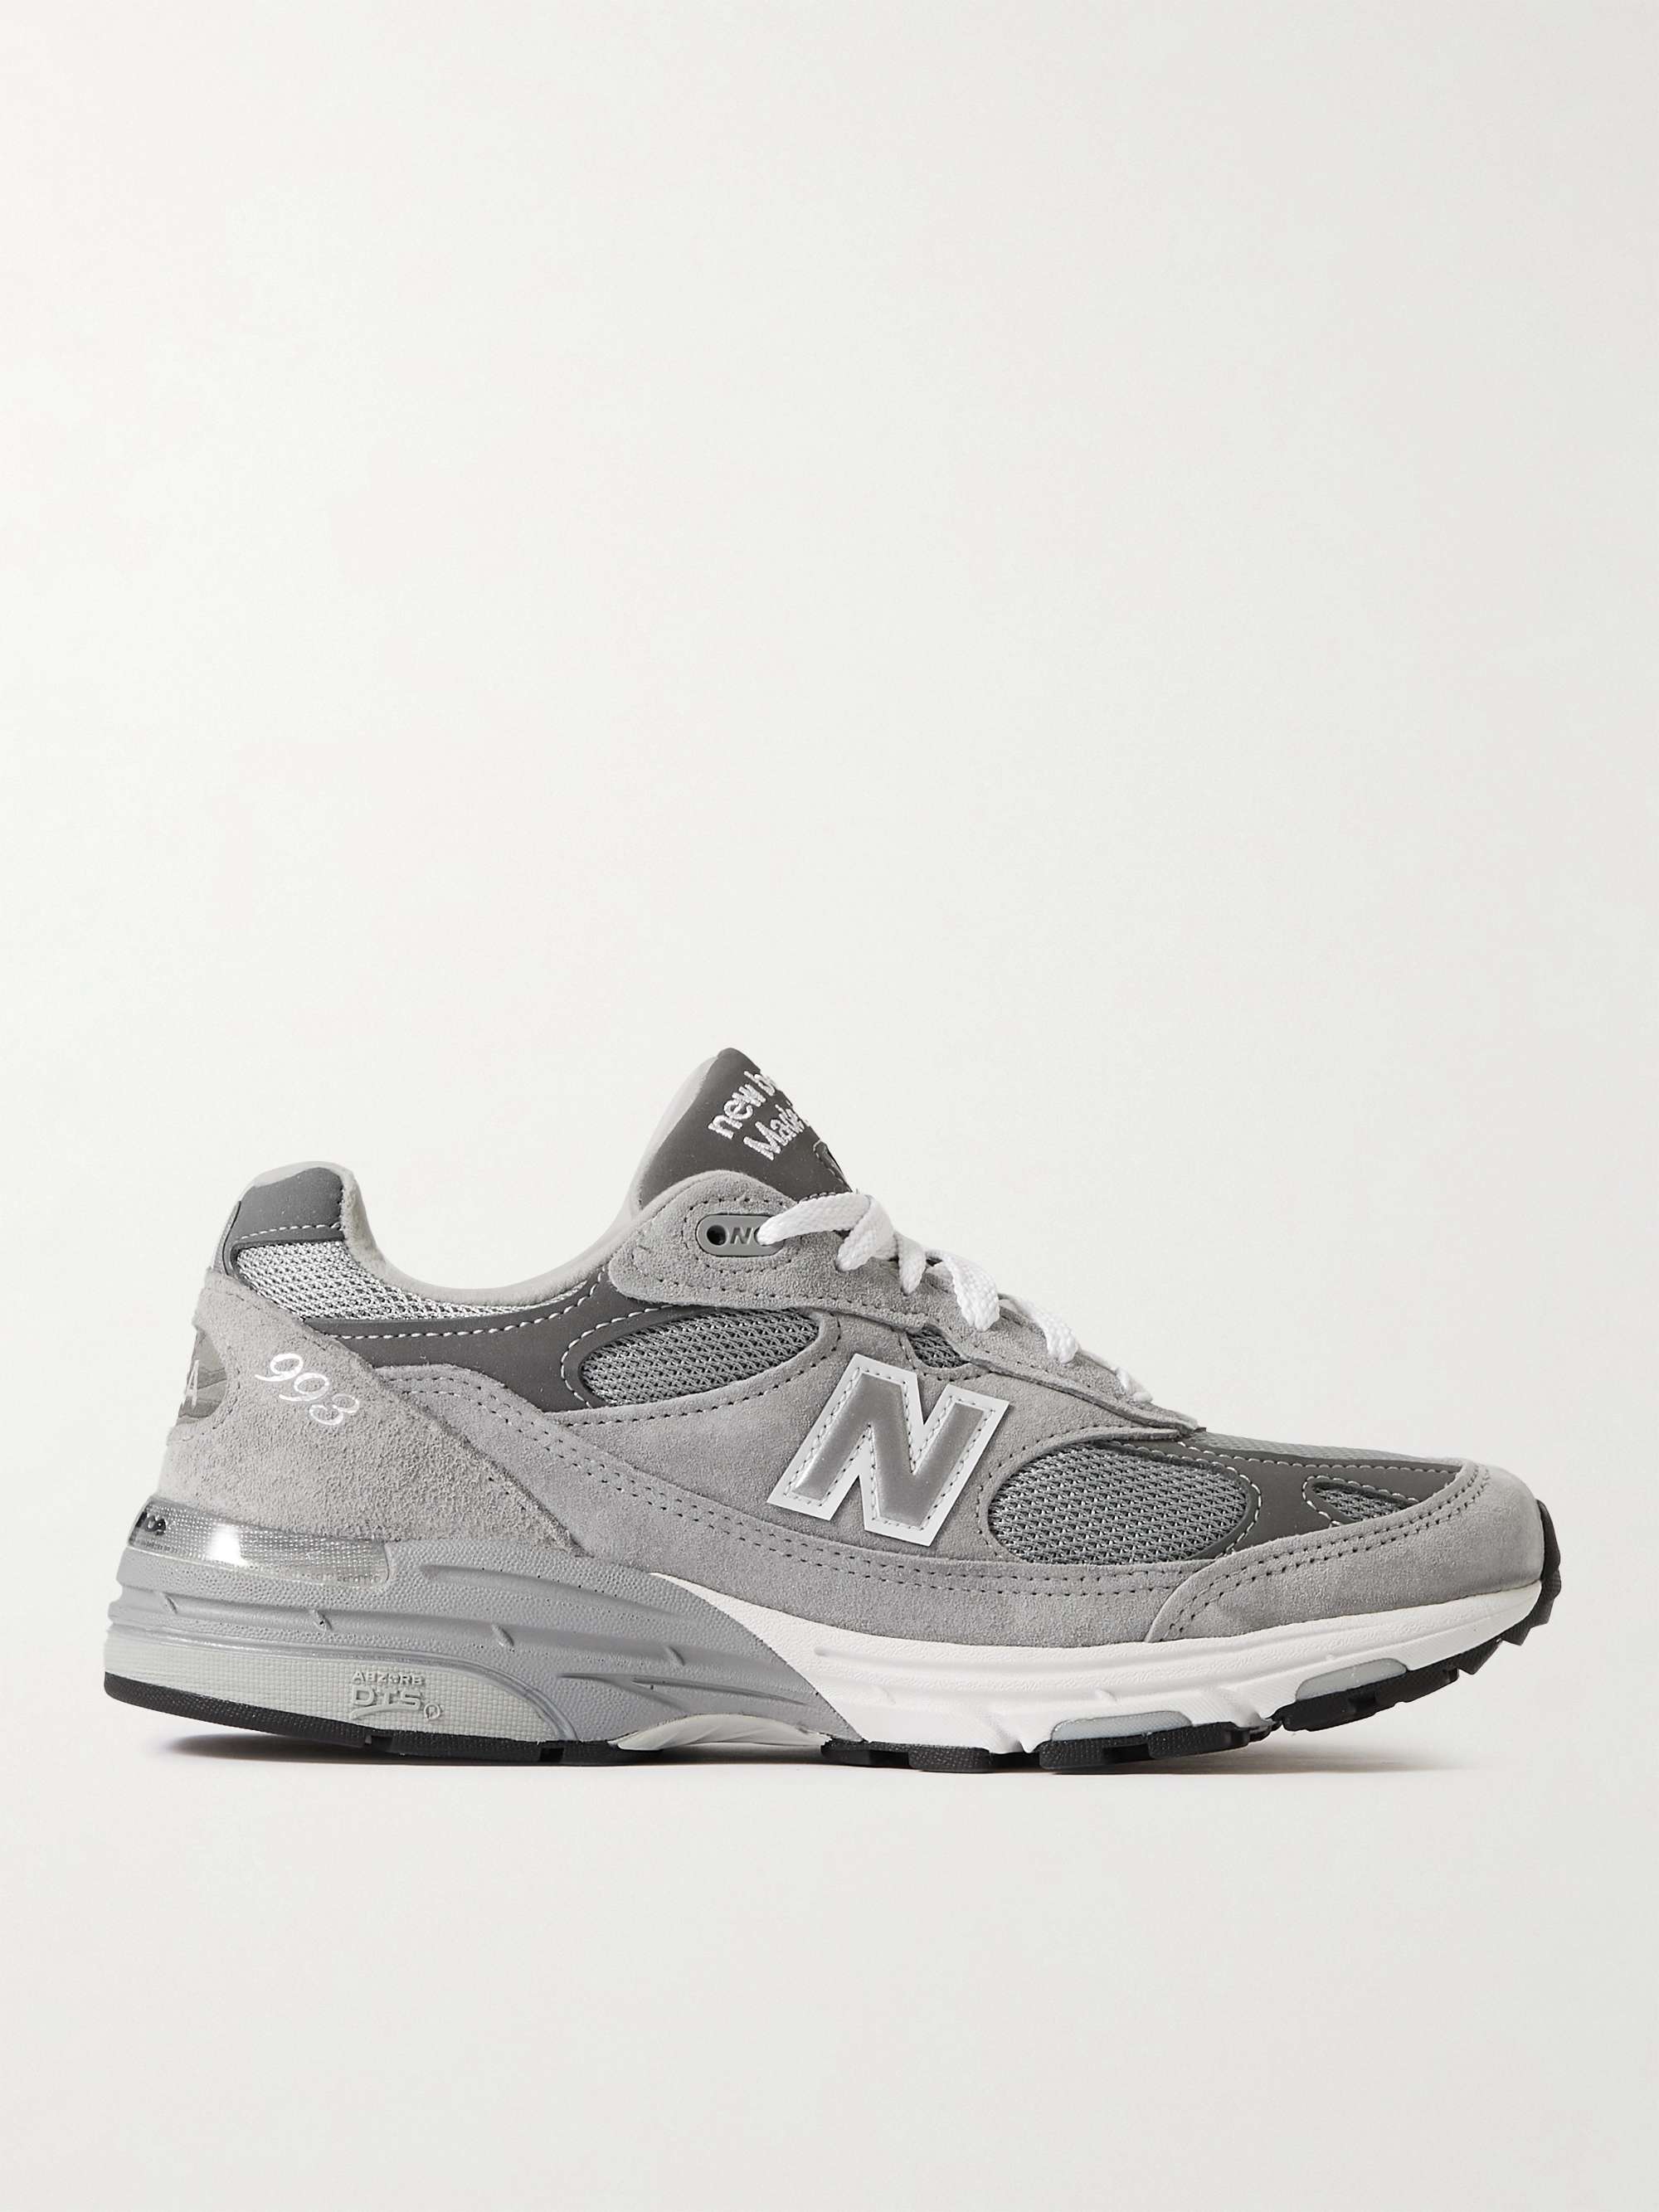 NEW BALANCE MIUSA 993 Suede, Mesh and Leather Sneakers